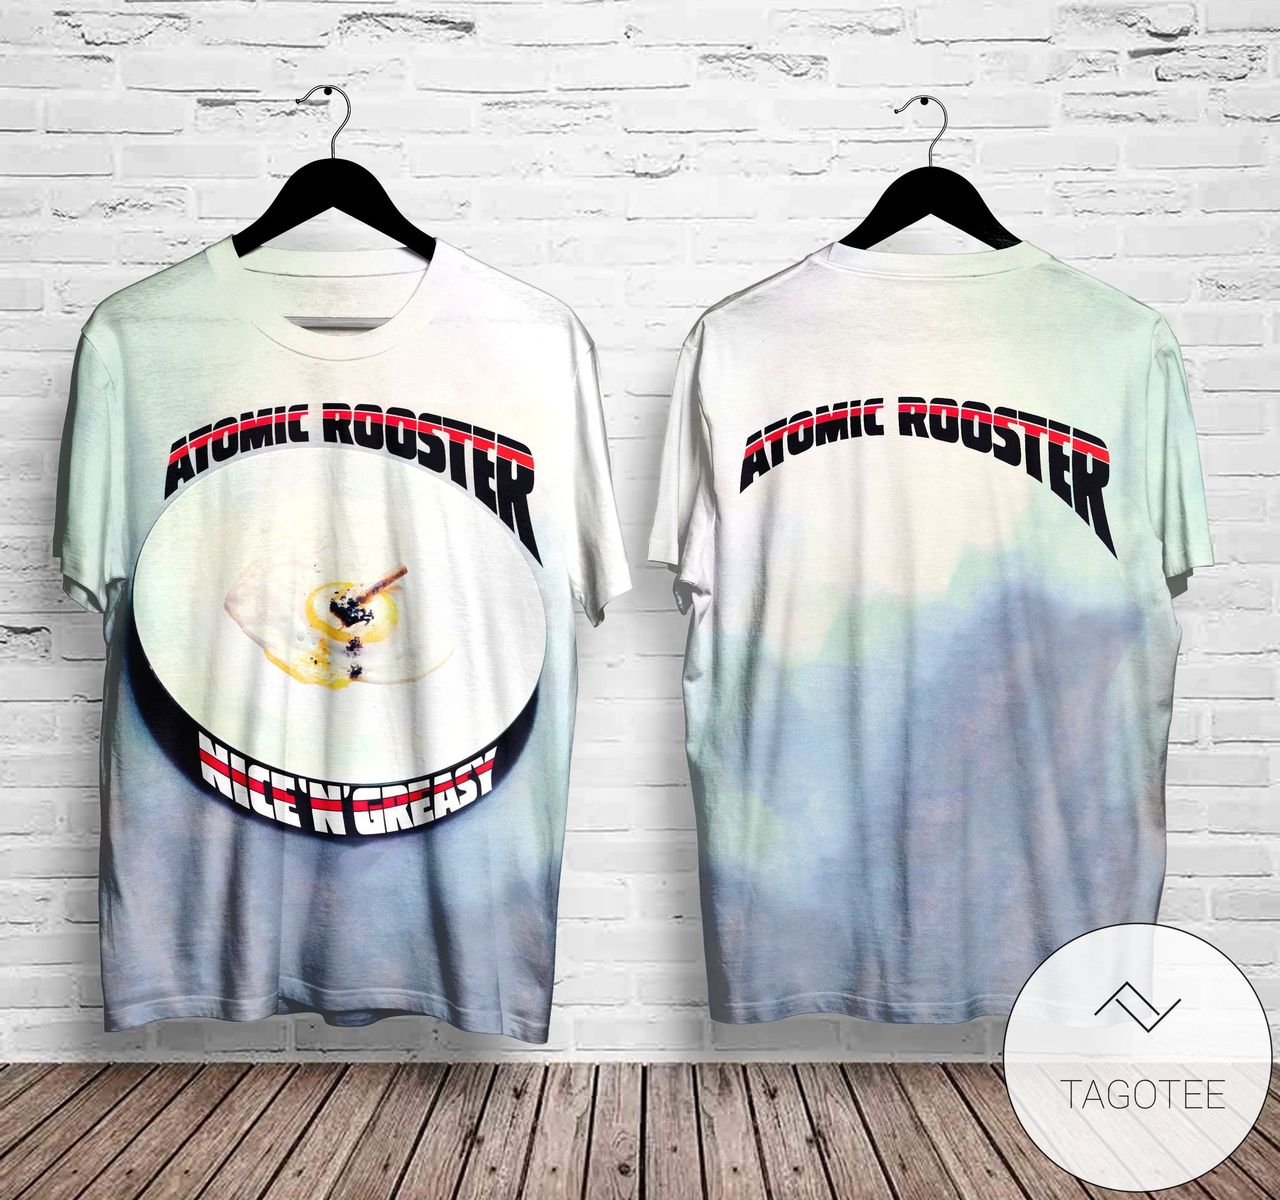 Atomic Rooster Nice 'n' Greasy Album Cover Shirt